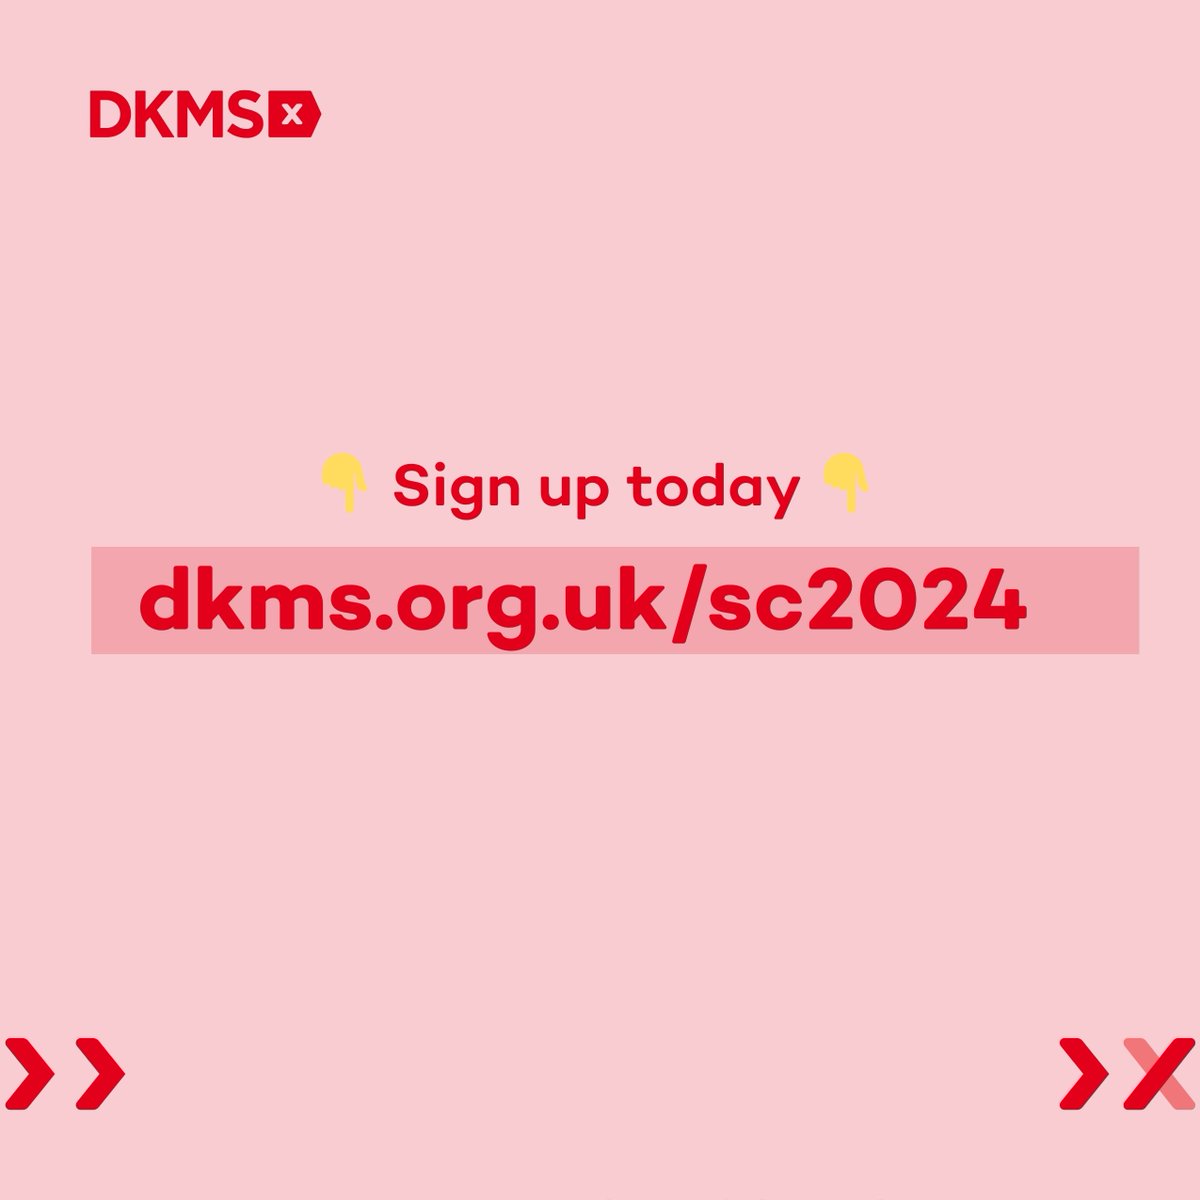 Introducing the #DKMS Summer Challenge! 🌞 Formerly known as 'The Swabtember Challenge', our annual sporting event is back and better than ever. 💪 Get ready for an incredible summer adventure - sign up today: dkms.org.uk/sc2024 🙌